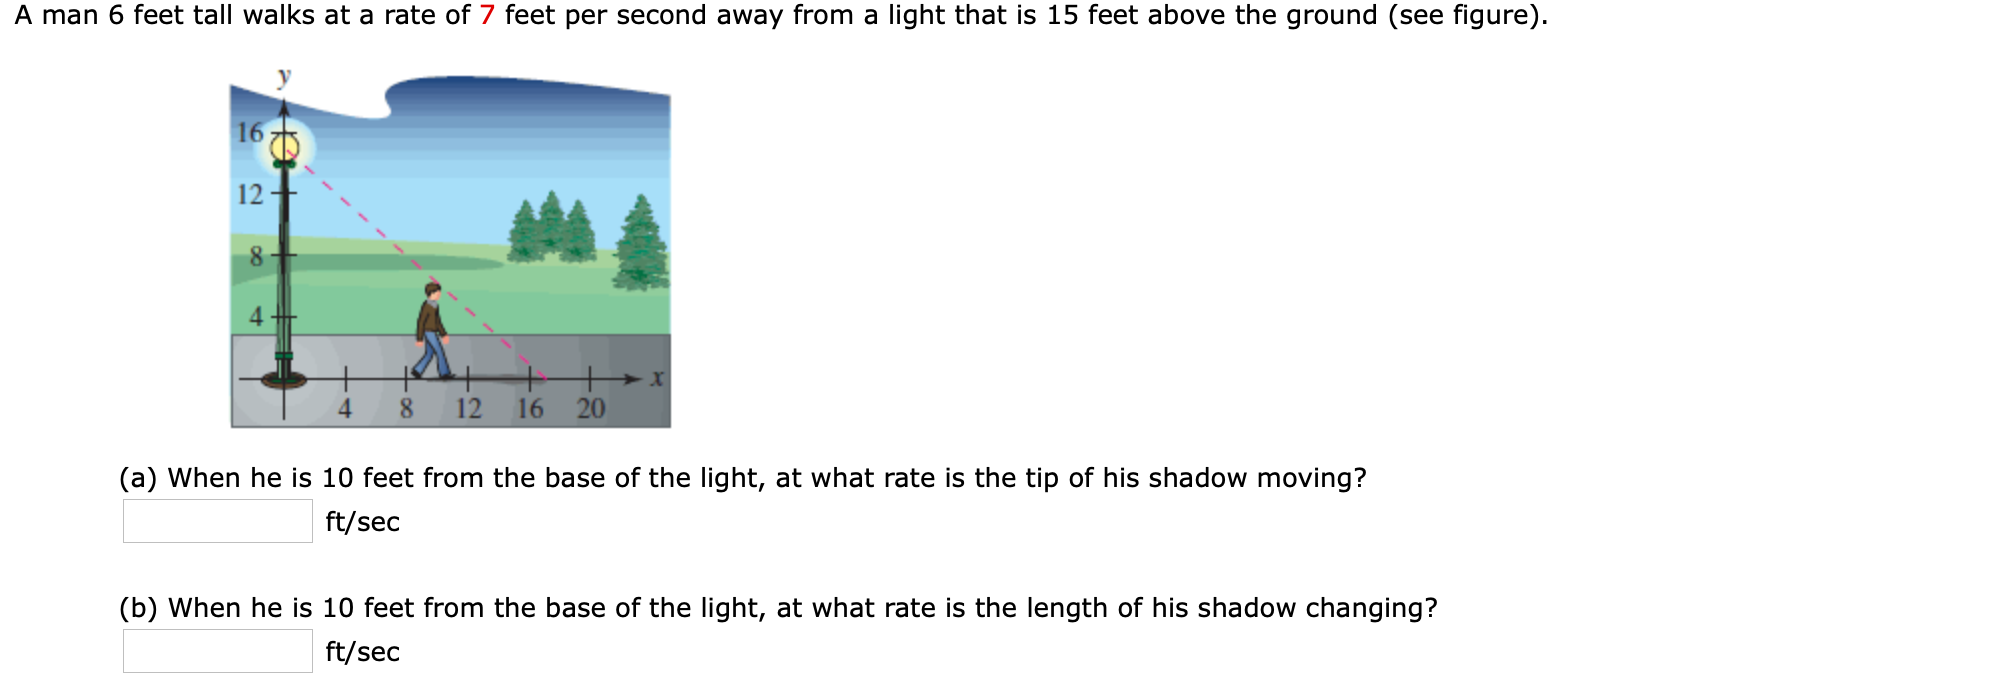 A man 6 feet tall walks at a rate of 7 feet per second away from a light that is 15 feet above the ground (see figure).
16
12
8
+
12
16
20
4.
8.
(a) When he is 10 feet from the base of the light, at what rate is the tip of his shadow moving?
ft/sec
(b) When he is 10 feet from the base of the light, at what rate is the length of his shadow changing?
ft/sec
